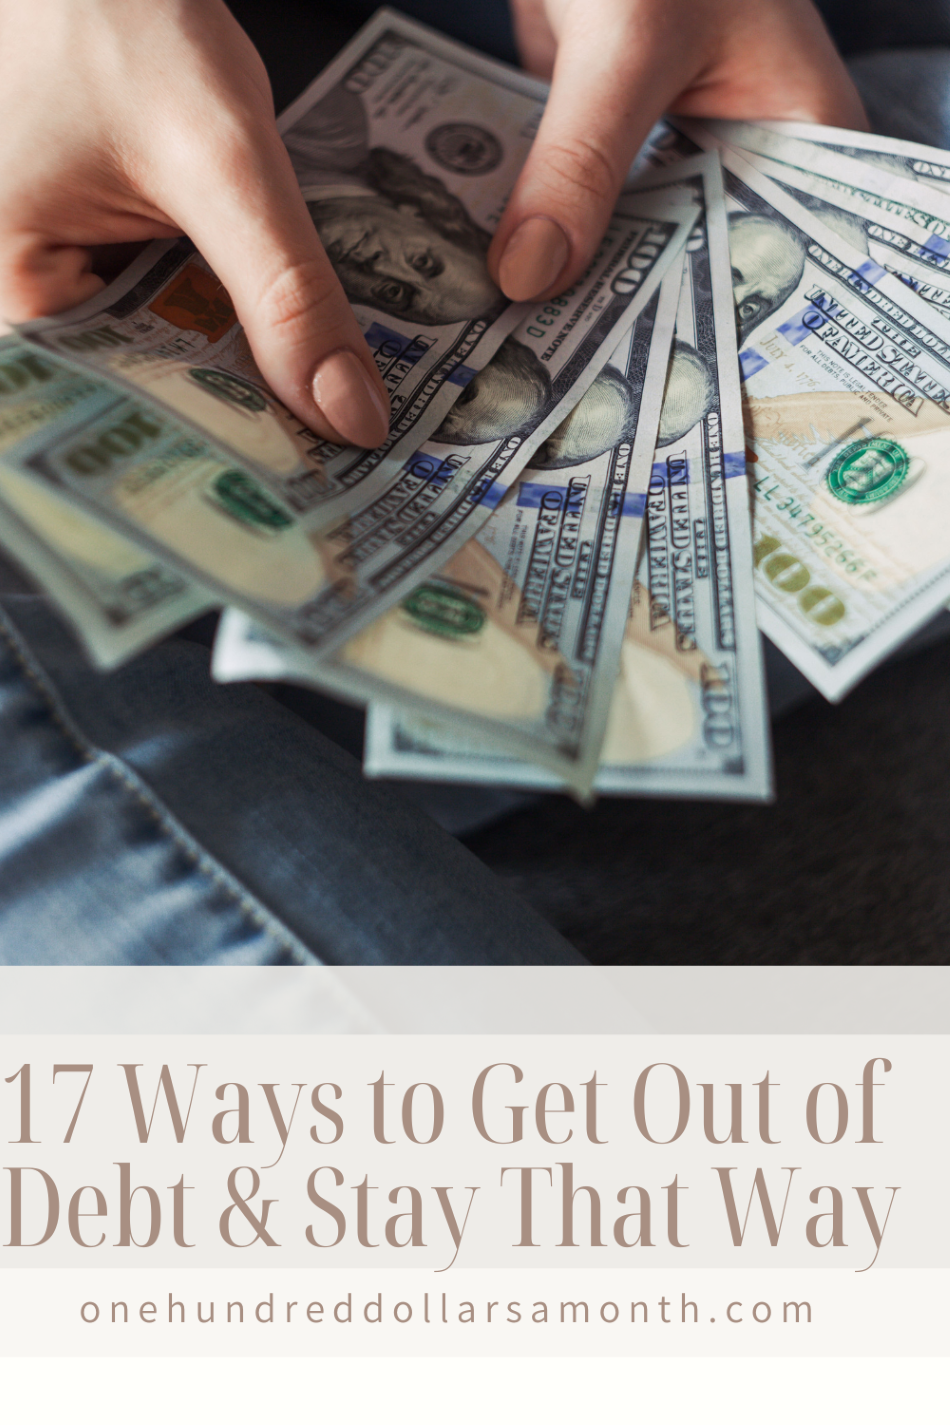 17 Ways to Get Out of Debt and Stay That Way